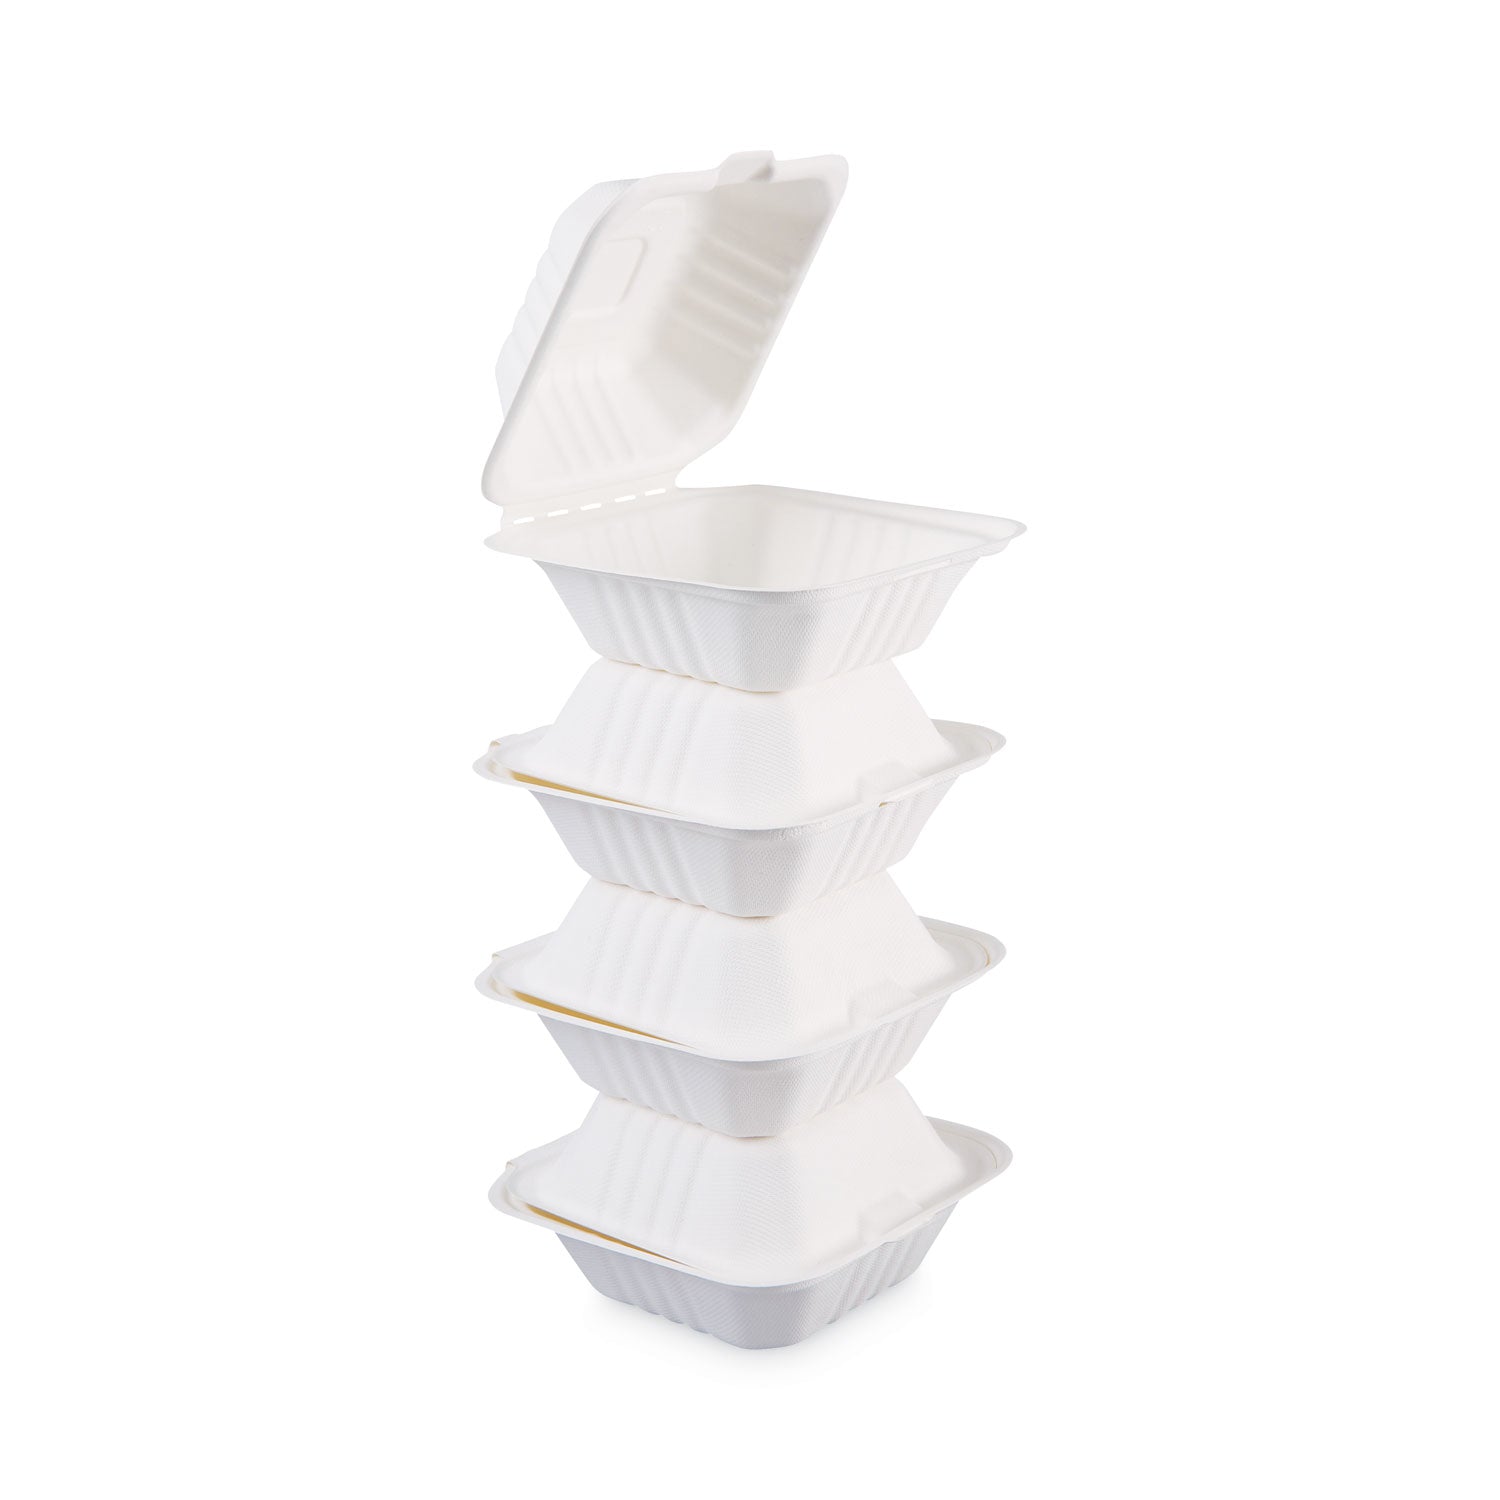 bagasse-food-containers-hinged-lid-1-compartment-6-x-6-x-319-white-sugarcane-125-sleeve-4-sleeves-carton_bwkhingewf1cm6 - 6